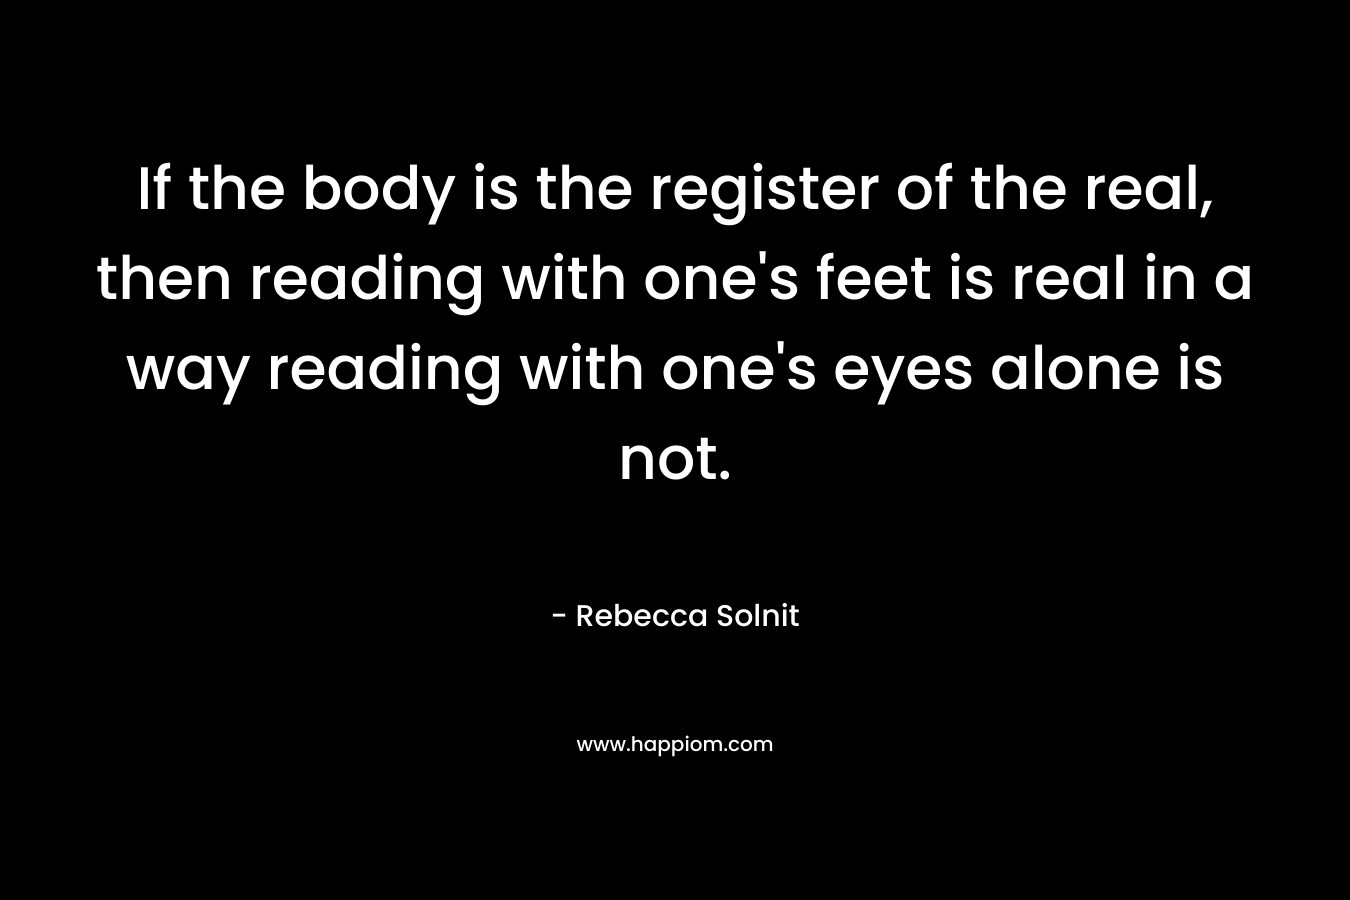 If the body is the register of the real, then reading with one’s feet is real in a way reading with one’s eyes alone is not. – Rebecca Solnit